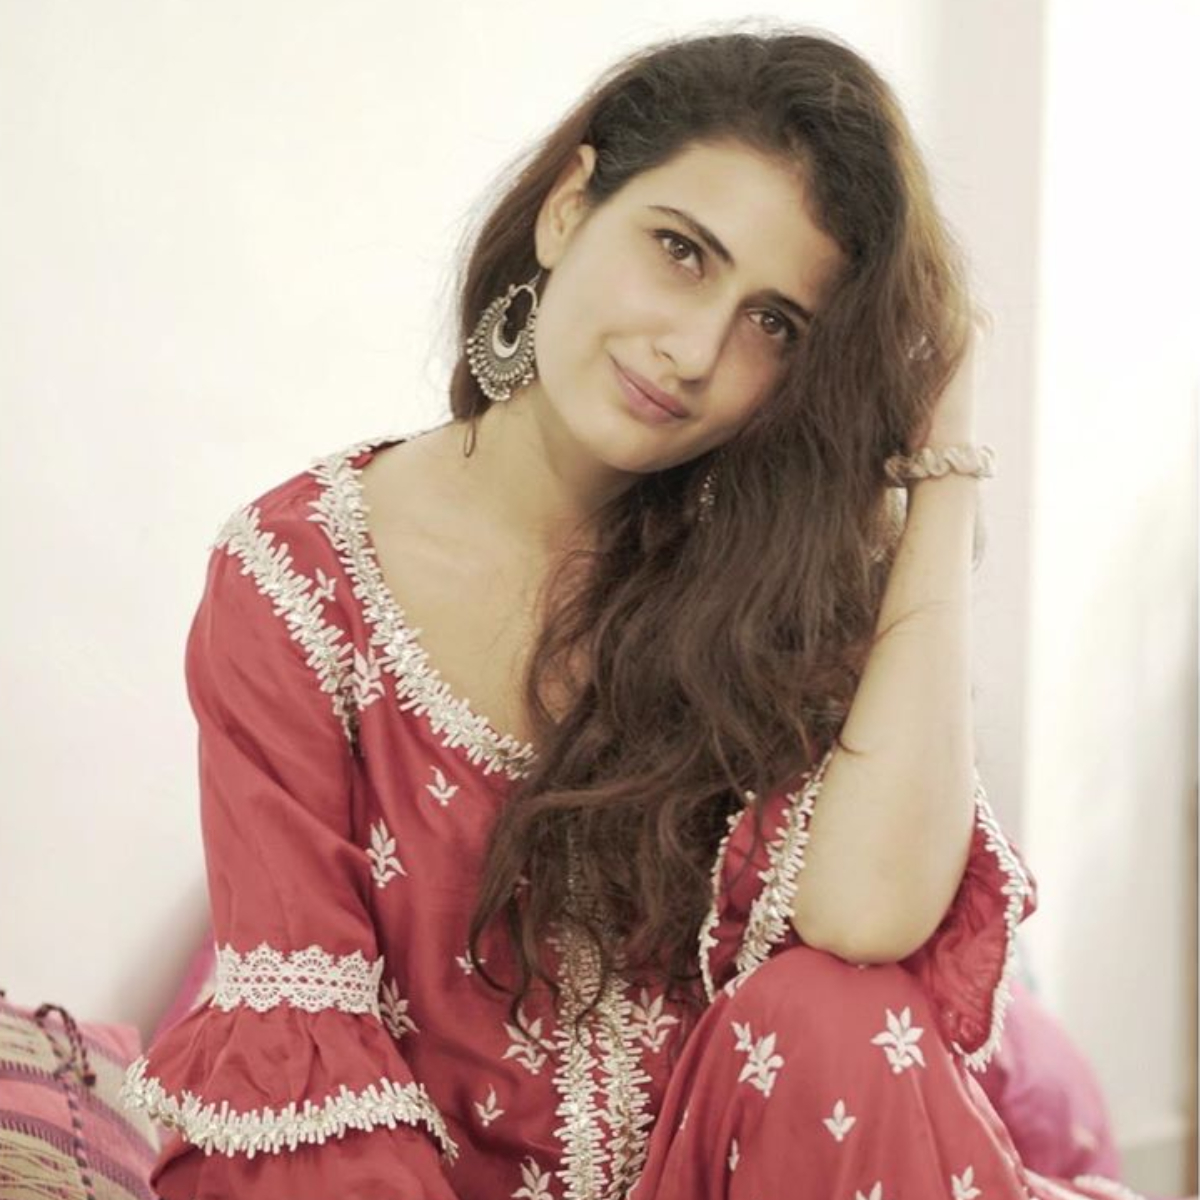 EXCLUSIVE: Fatima Sana Shaikh&#039;s SHOCKING confession on facing sexual abuse as a kid &amp; battling casting couch